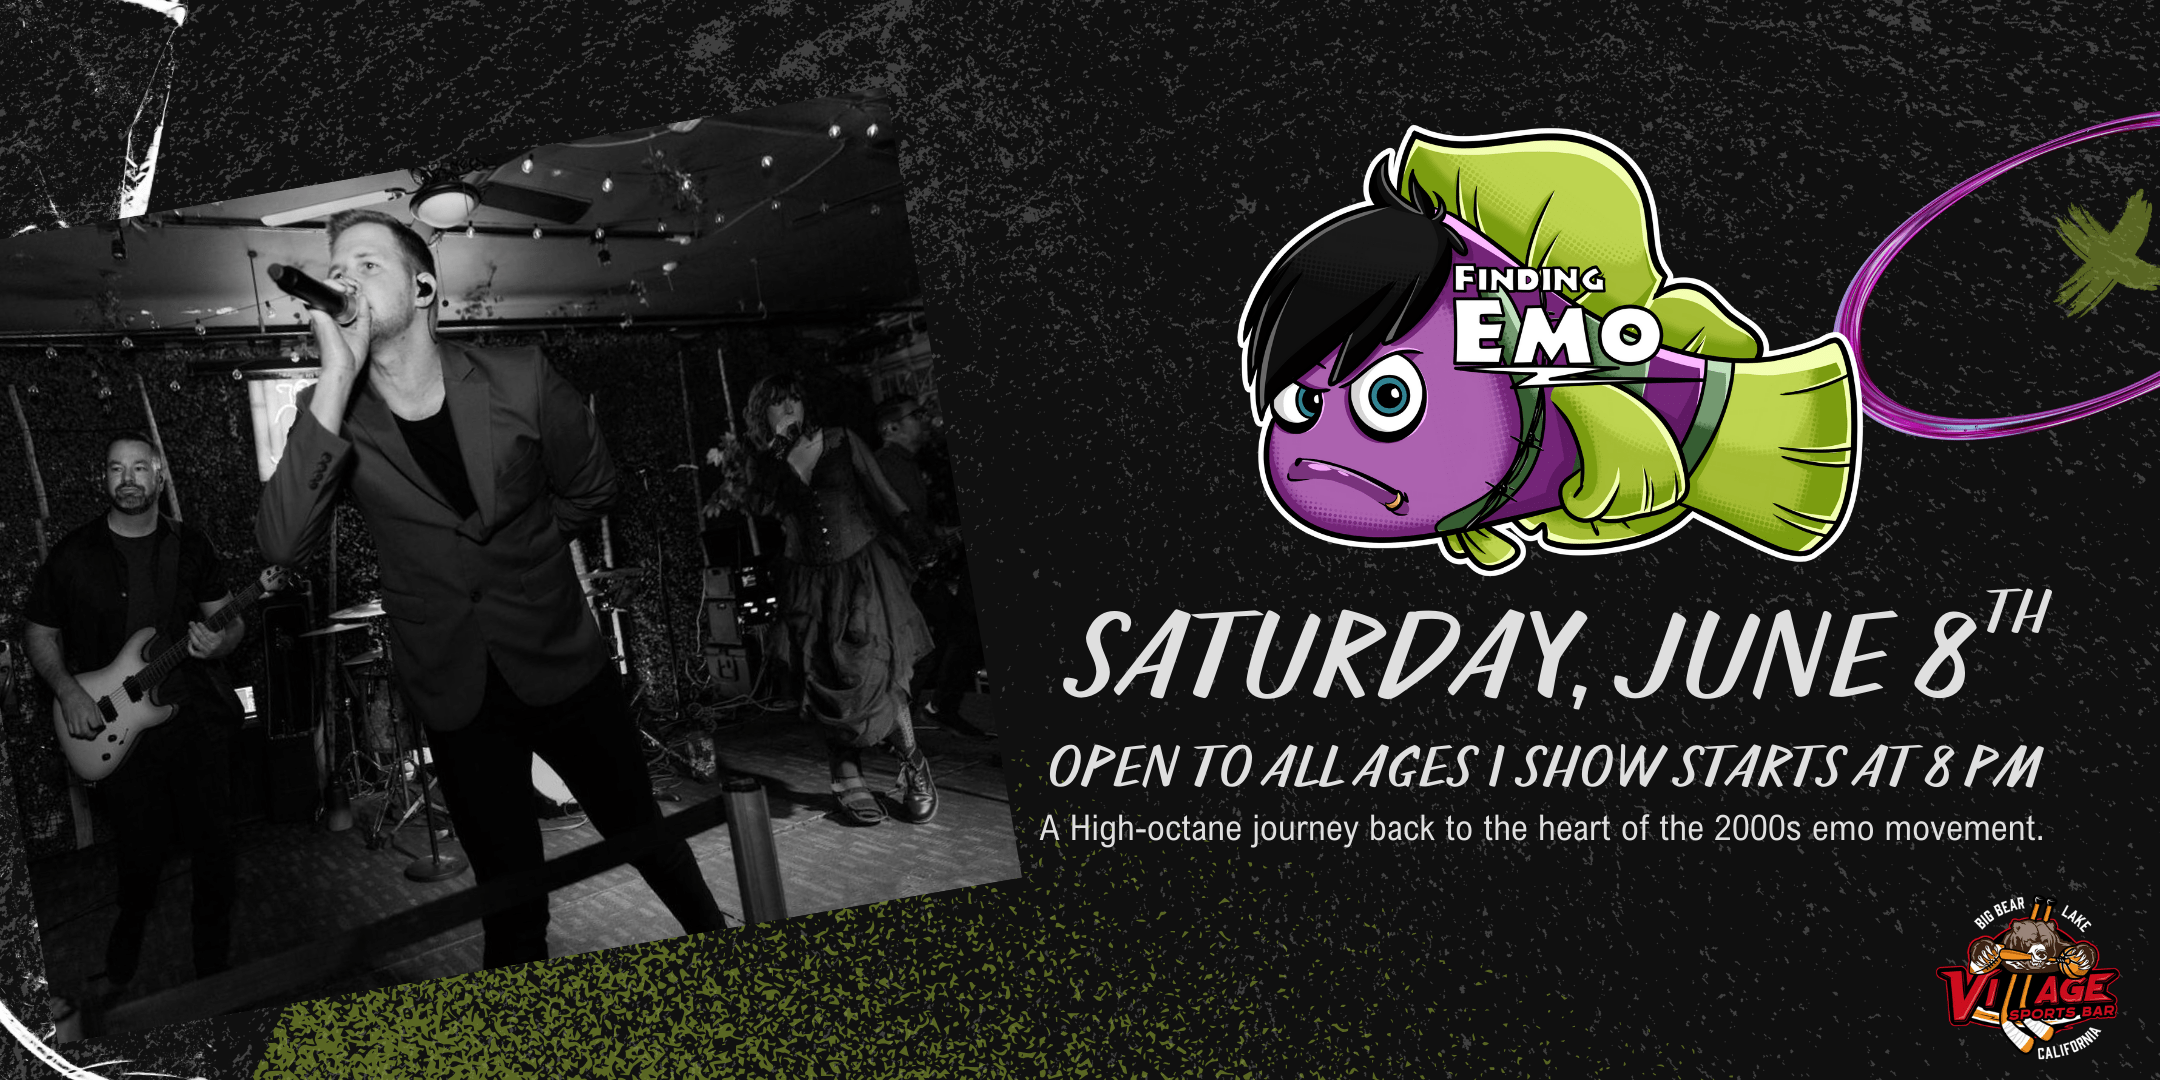 Village Sports Bar Presents: Finding Emo, The Ultimate 2000s Emo Cover Experience